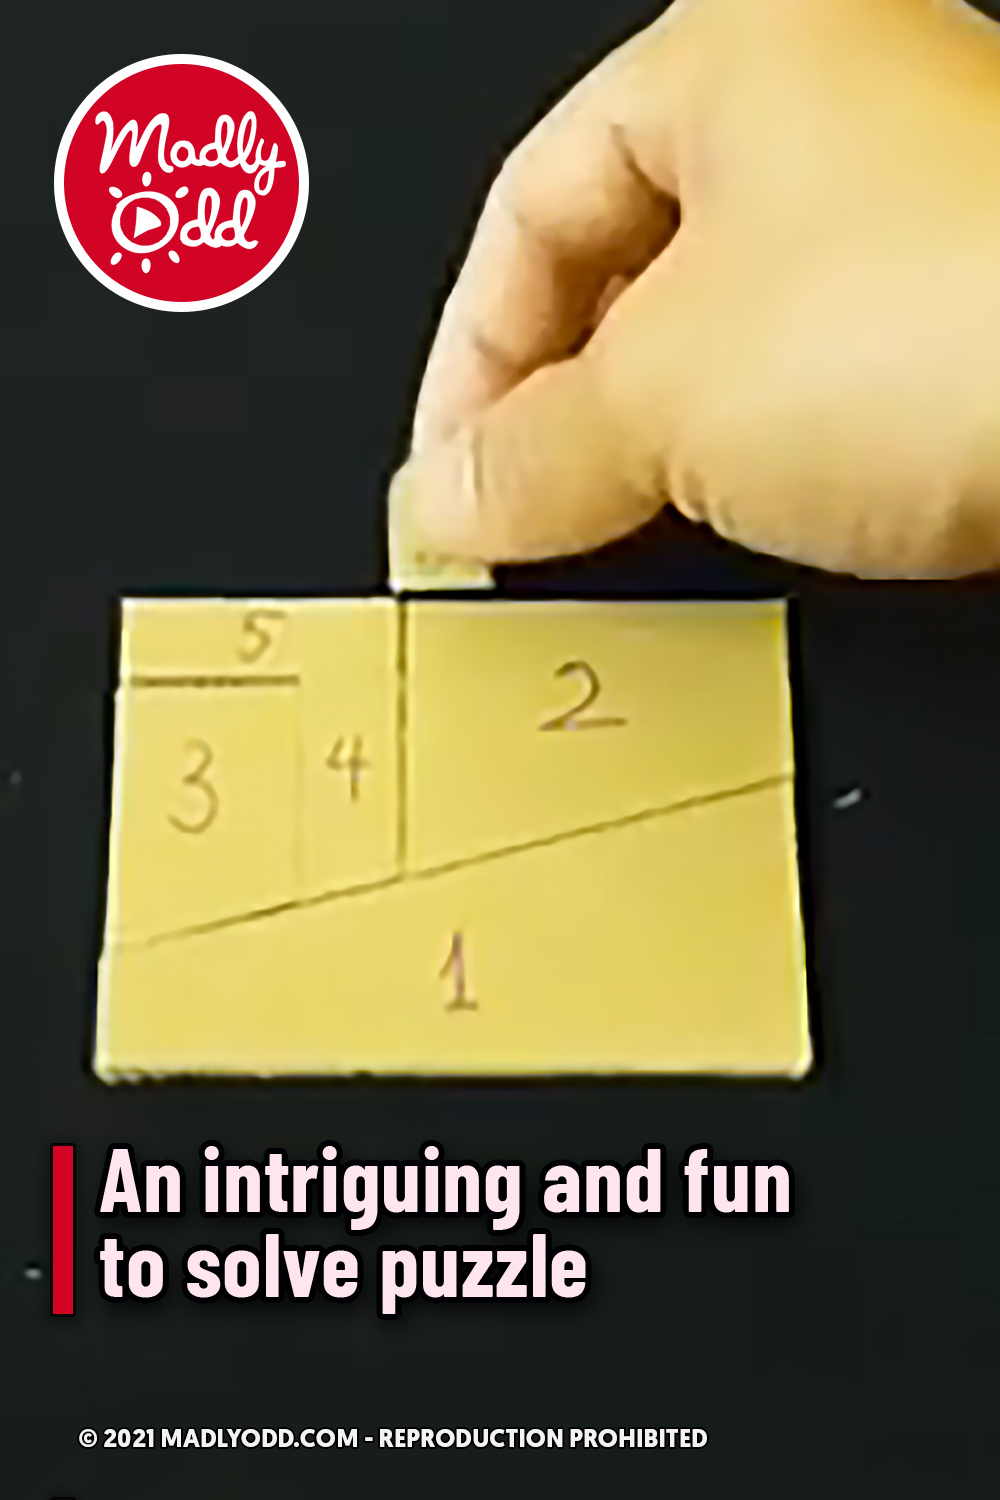 An intriguing and fun to solve puzzle